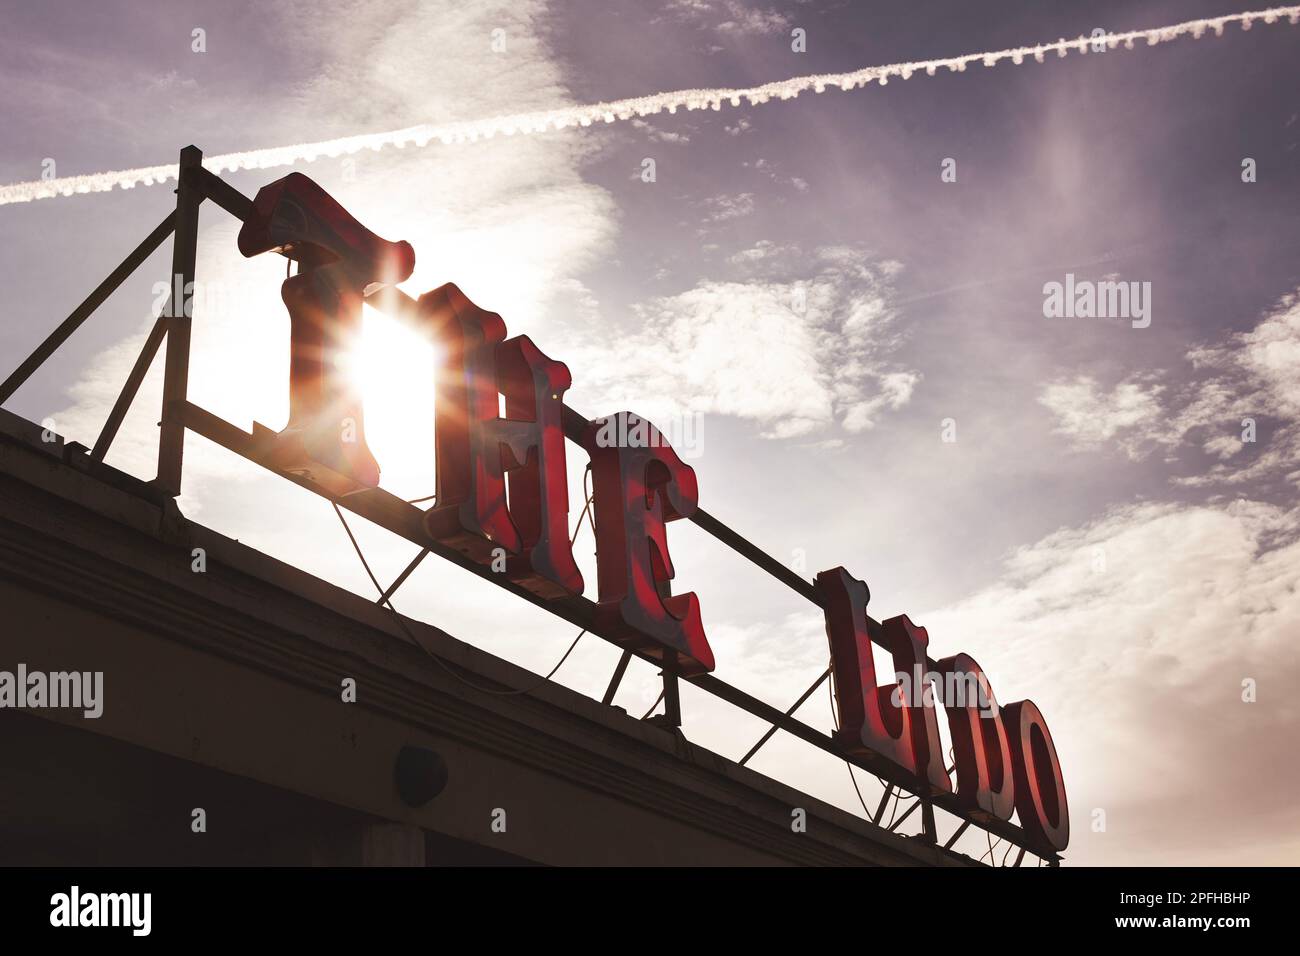 Looking up at The Lido sign in Worthing, West Sussex, UK Stock Photo